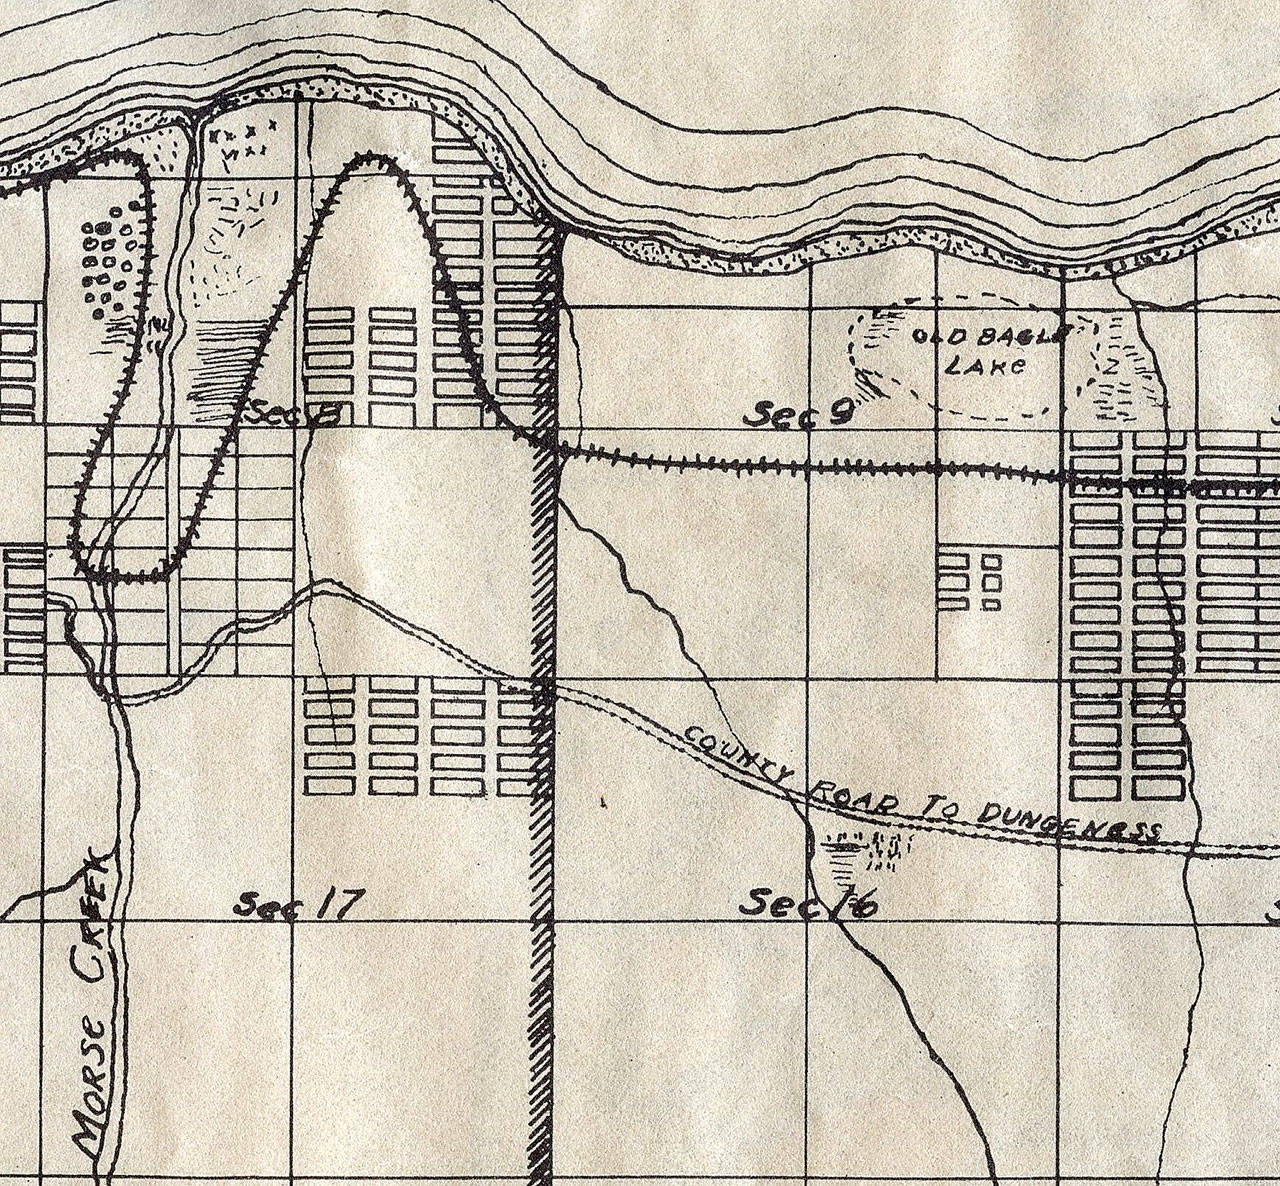 Portion of a map published in 1912 by Port Angeles Investment Co. (John McNutt Collection)